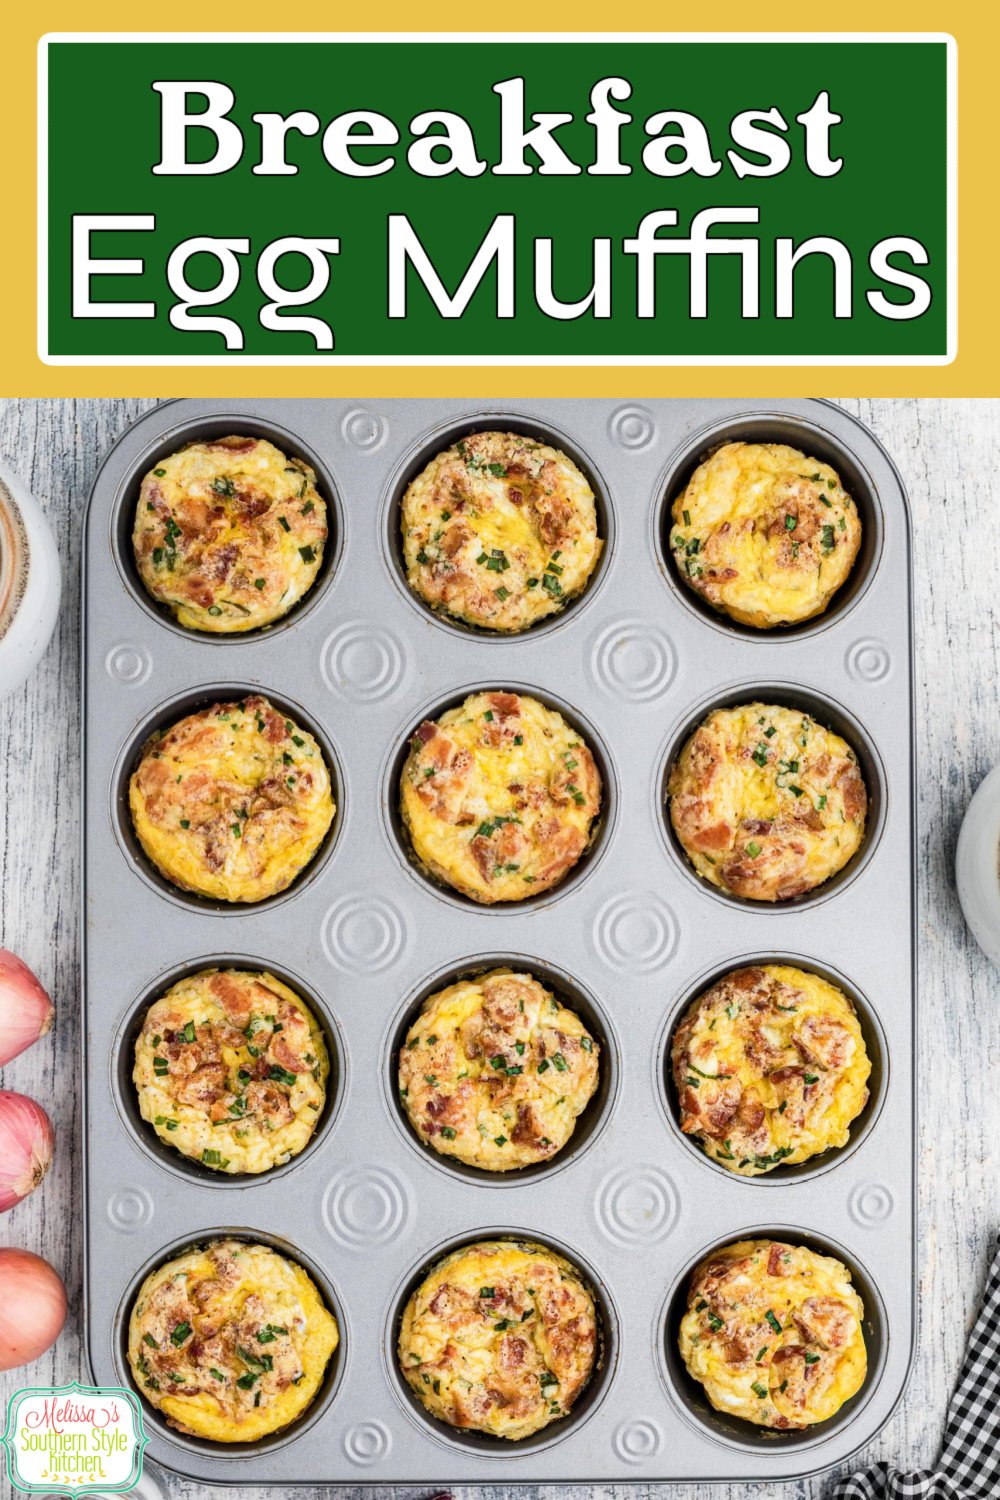 These Breakfast Egg Muffins are made in a cupcake pan for individual serving size portions making them ideal for busy mornings on the go #breakfastmuffins #eggmuffins #eggs #easyeggrecipes #muffins #muffinrecipes #lowcarb #ketomuffins via @melissasssk